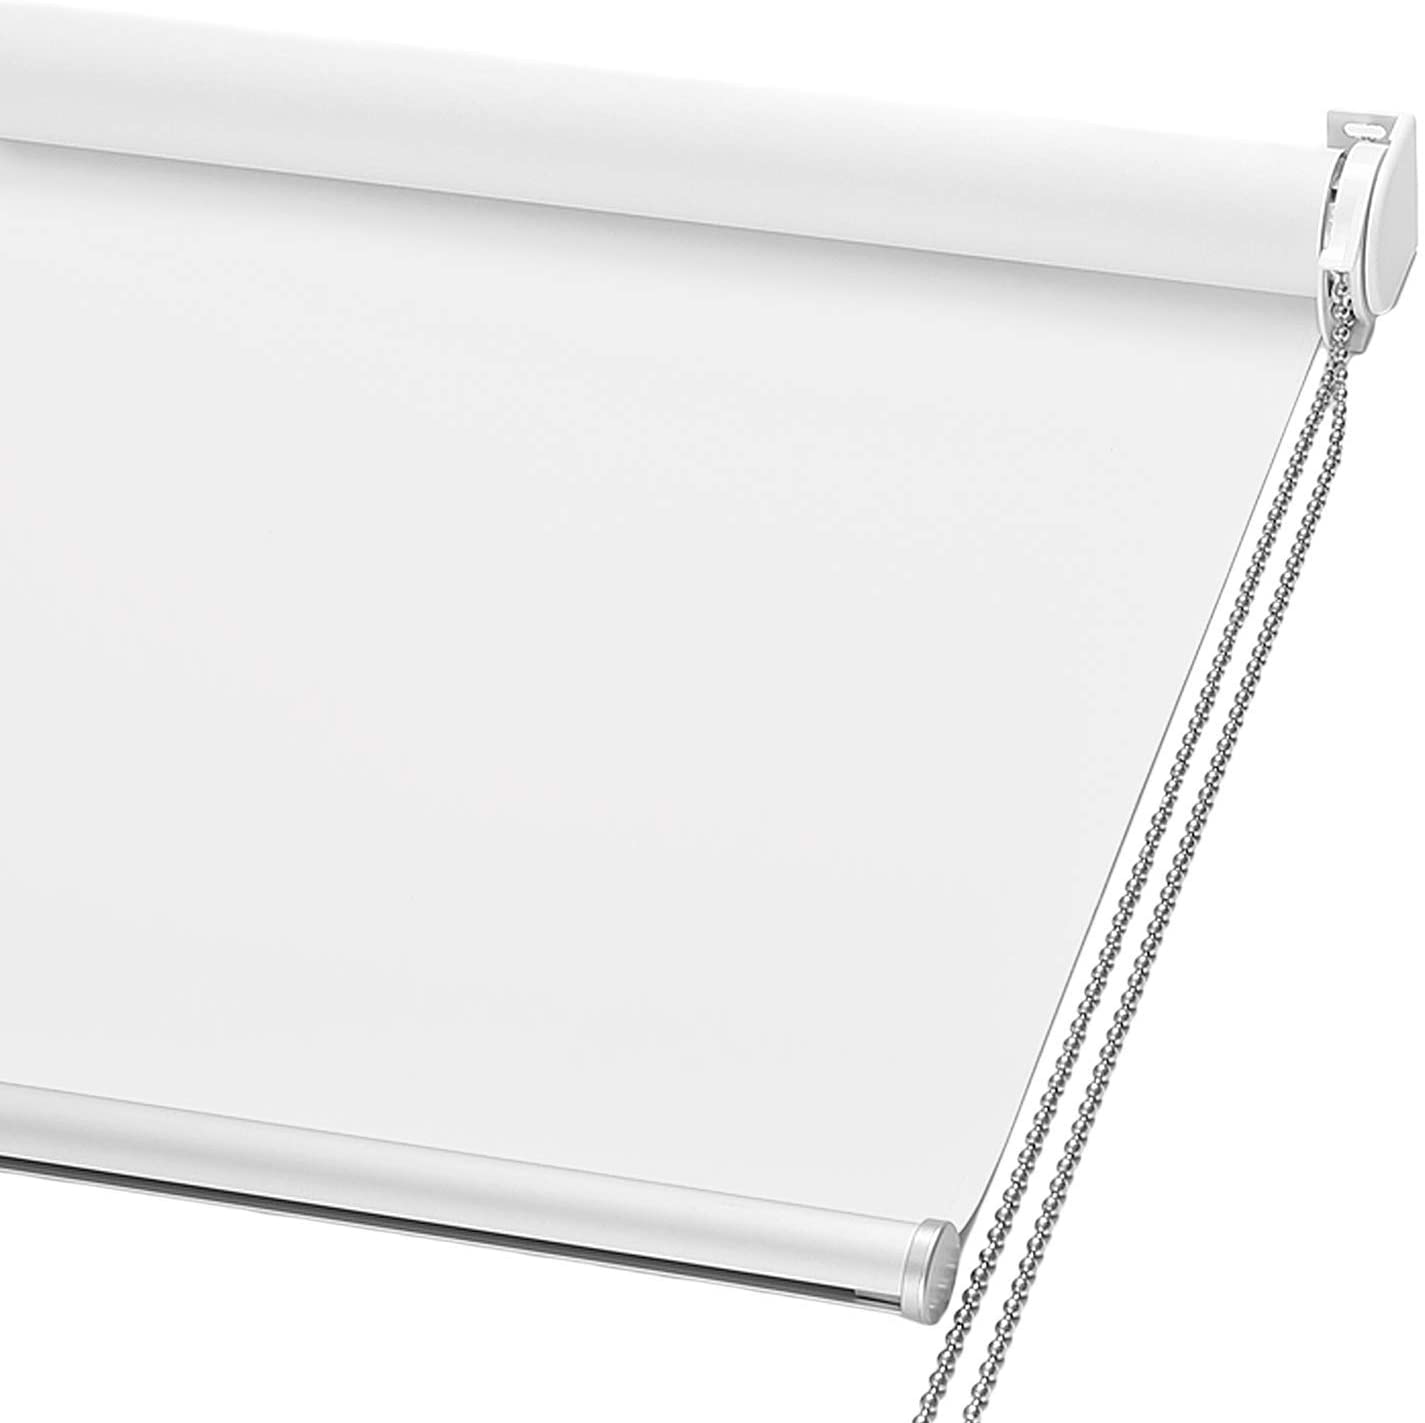 Wemoh 100% Blackout Roller Shade, Window Blind with Thermal Insulated, UV Protection Fabric. Total Blackout Roller Blind for Office and Home. Easy to Install. White,20" W x 72" H